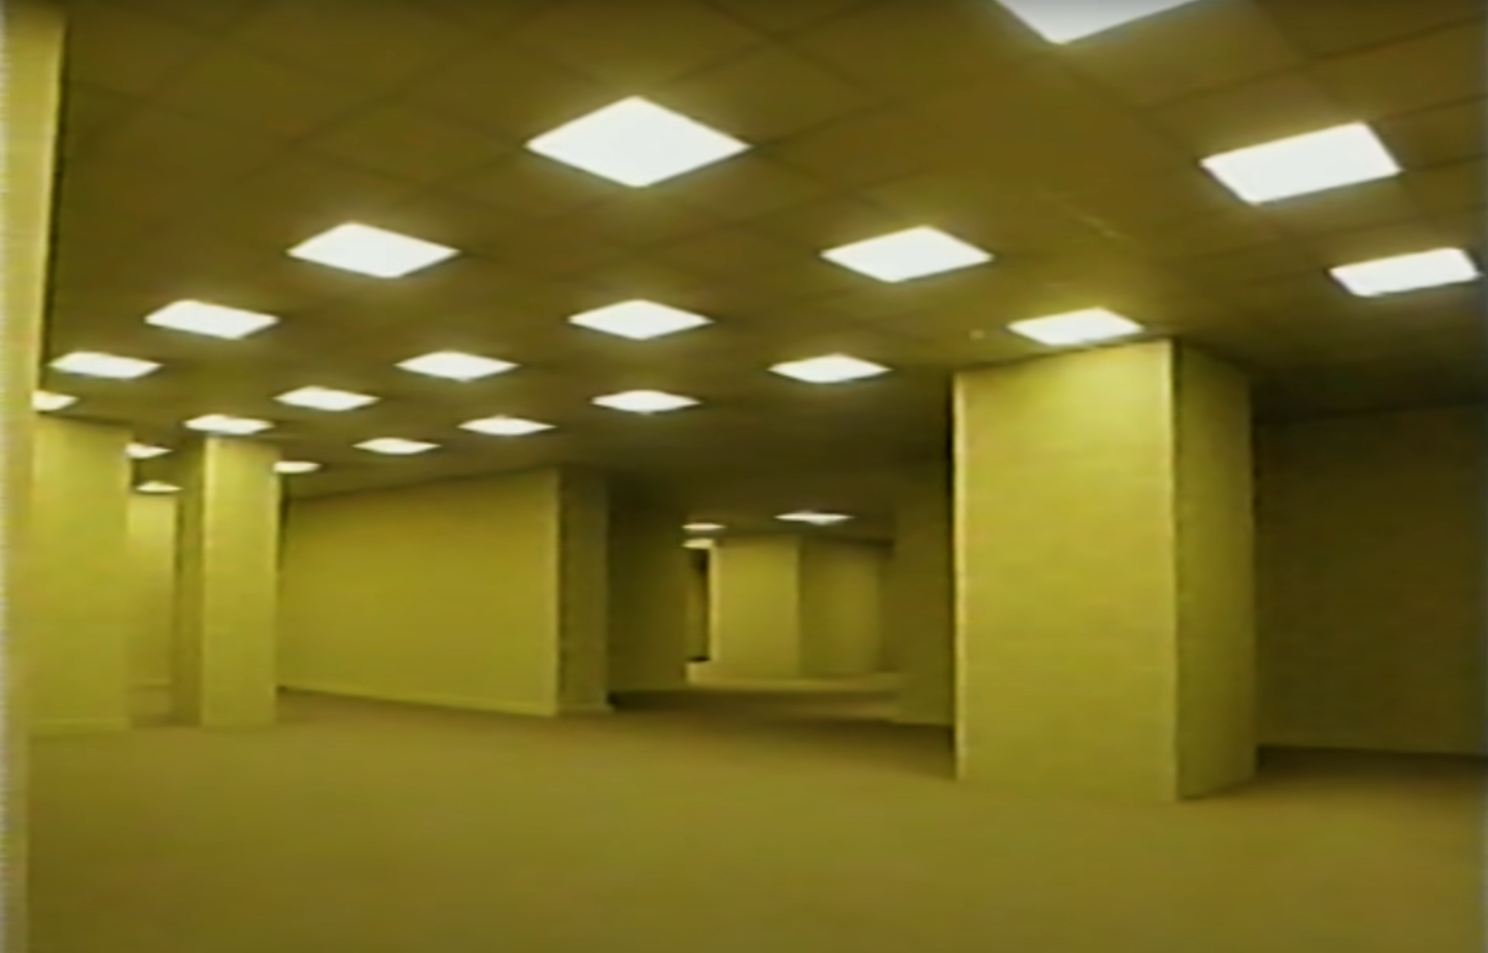 A series of overhead lights in an empty office building hallway